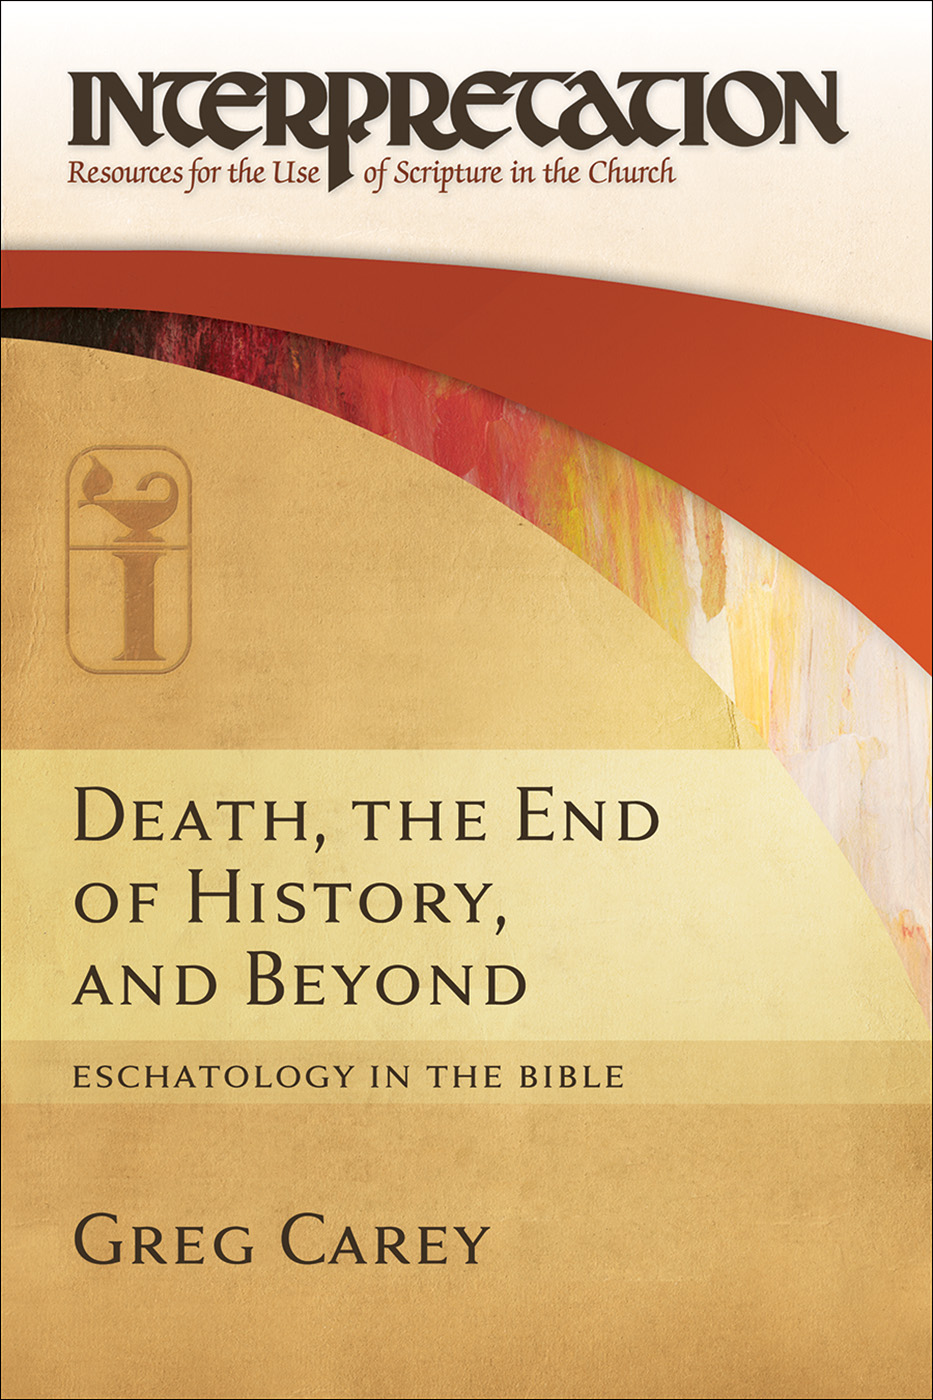 Death, the End of History, and Beyond